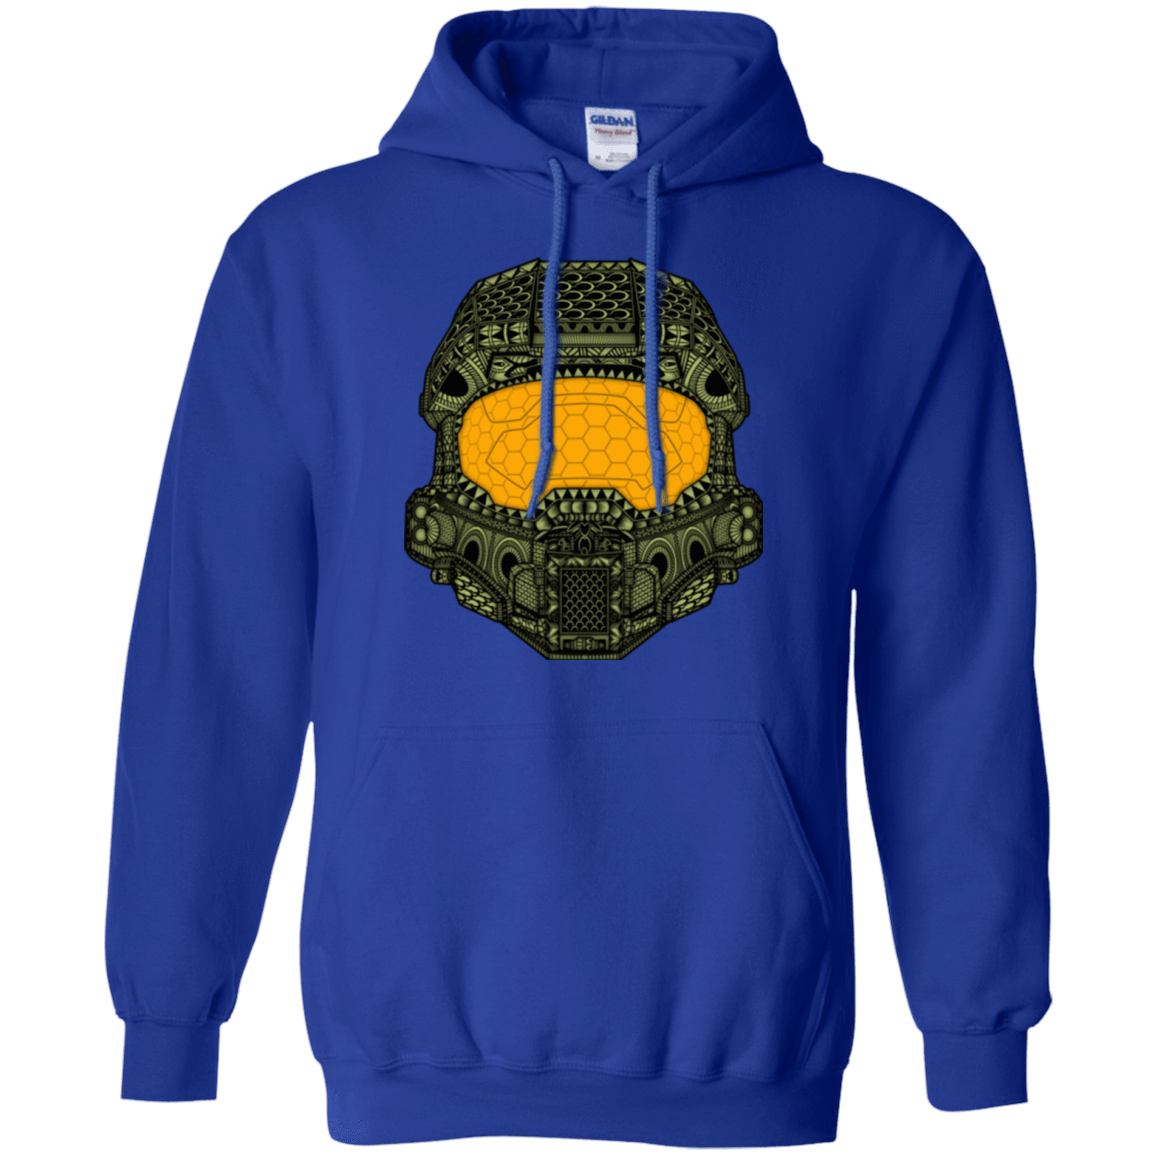 Sweatshirts Royal / Small The Chief Pullover Hoodie